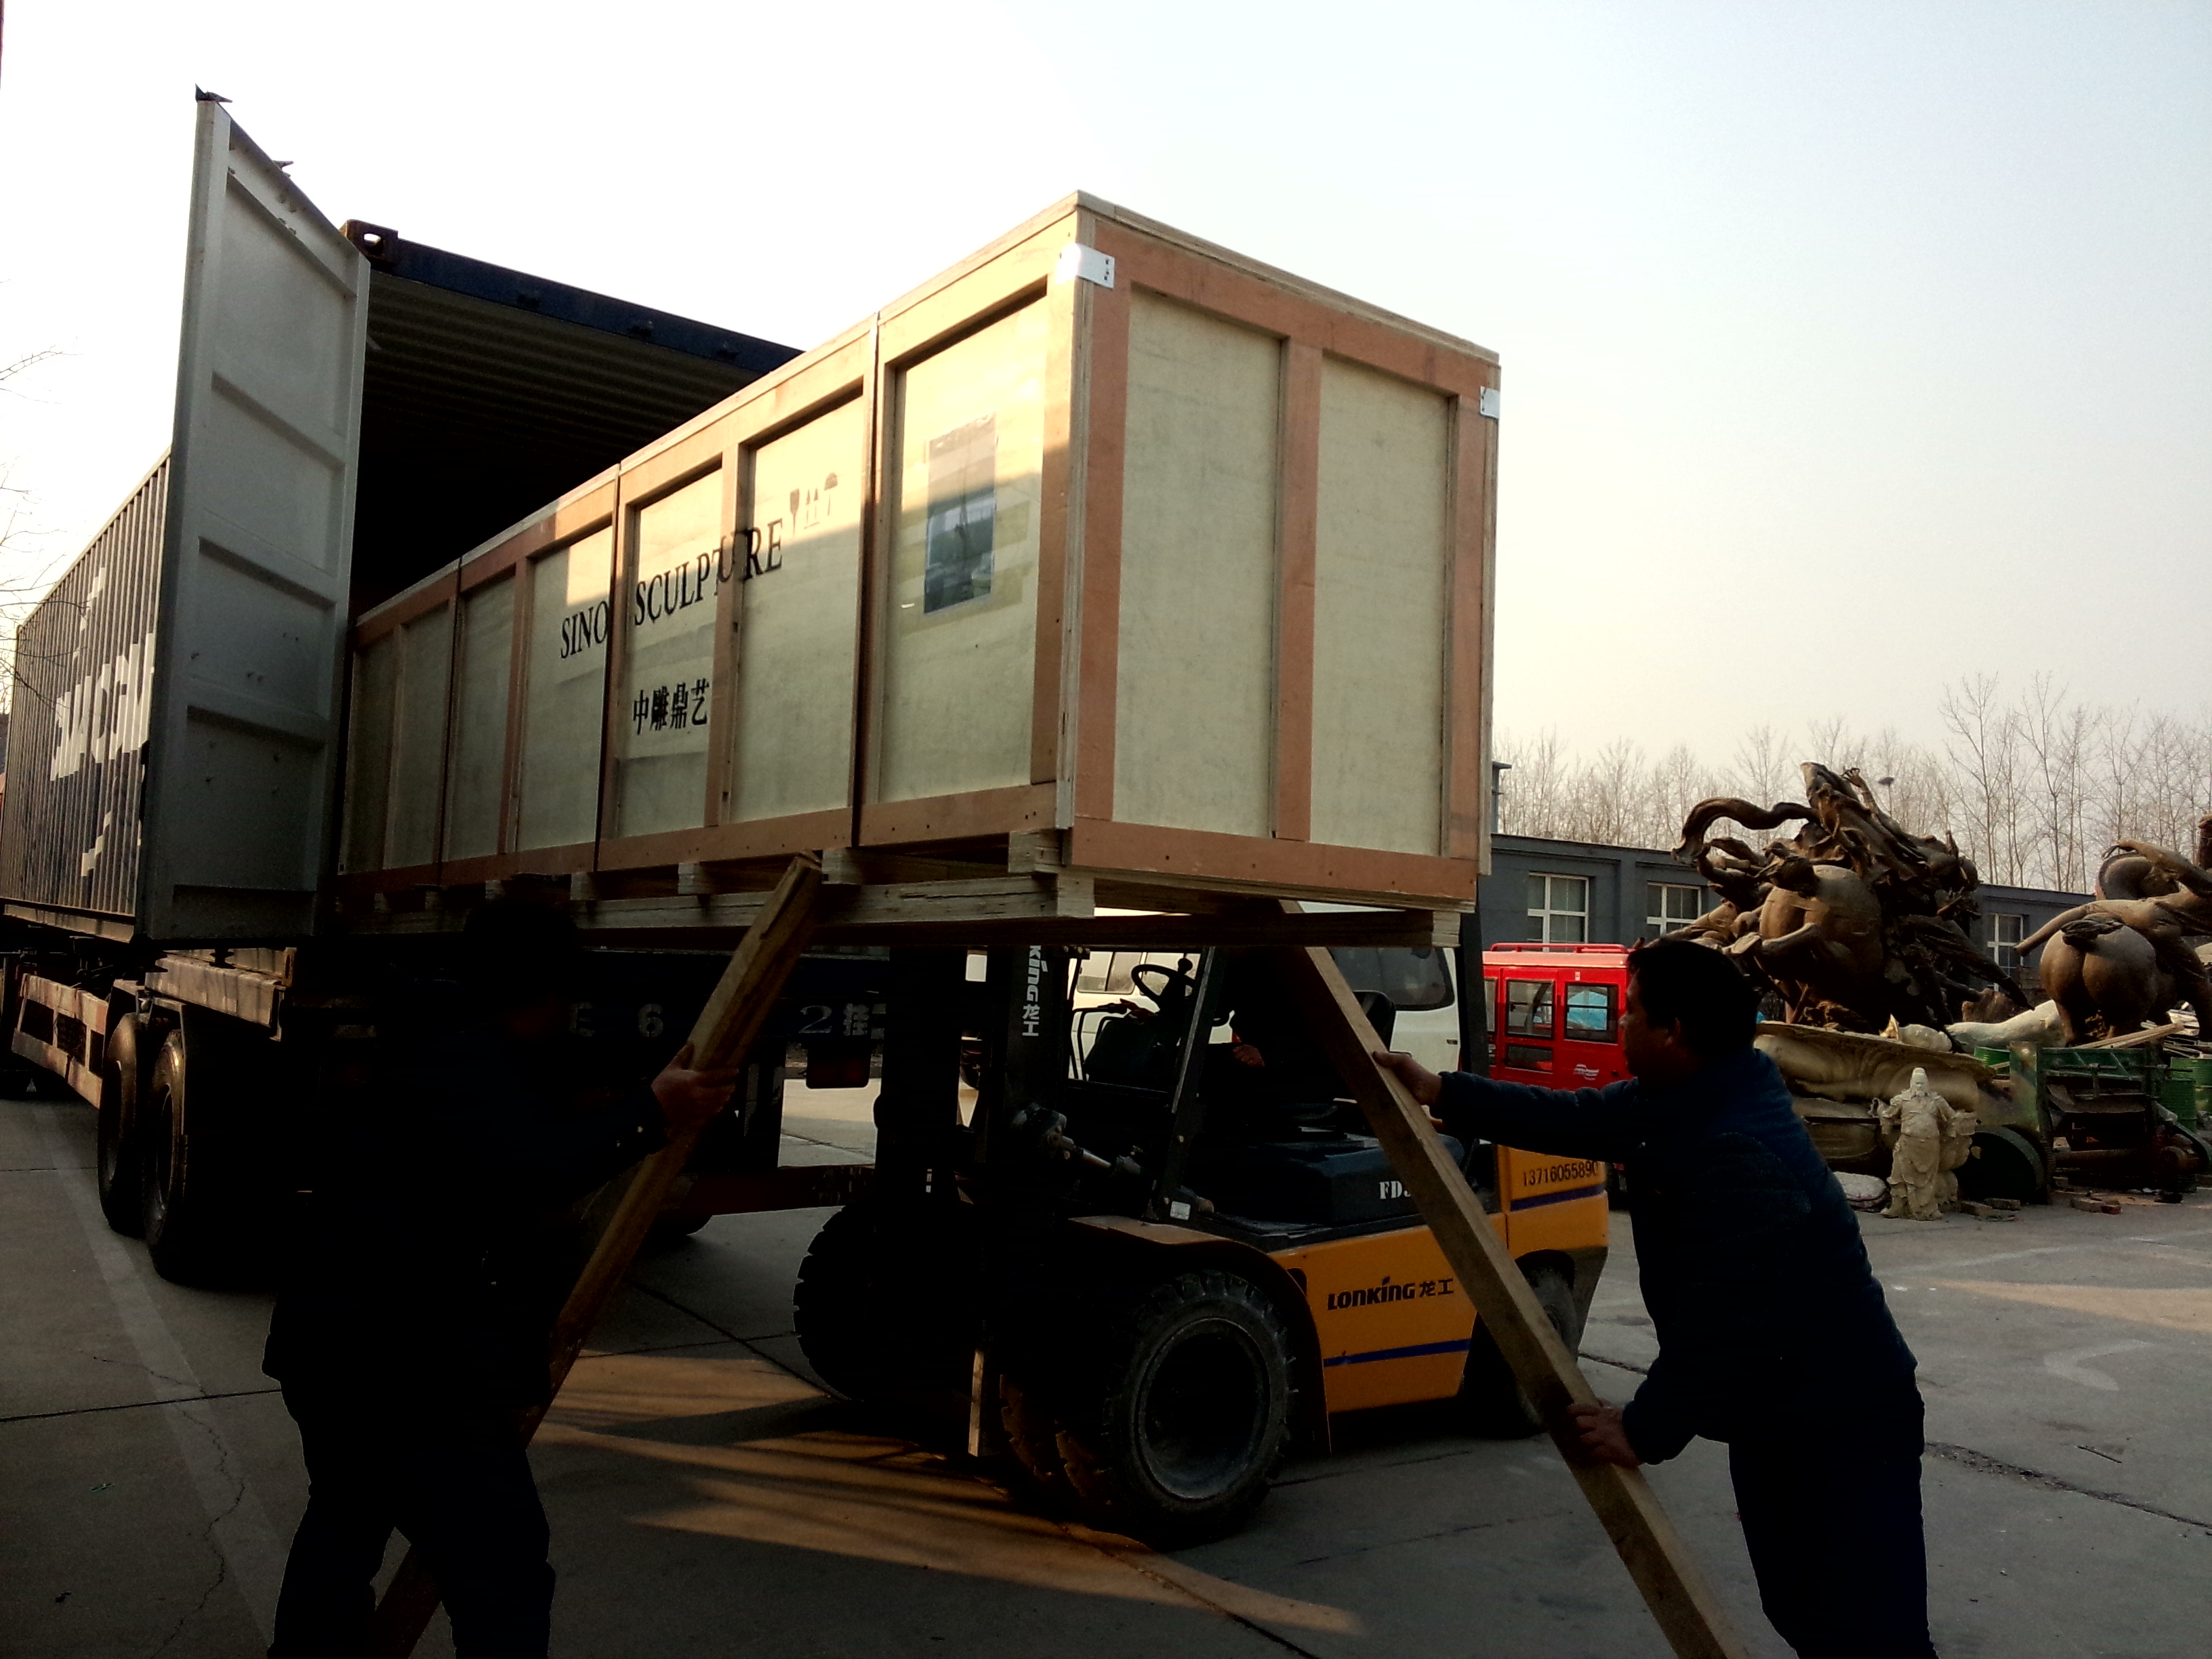 Container loading of the lost wax bronze cast sculpture 